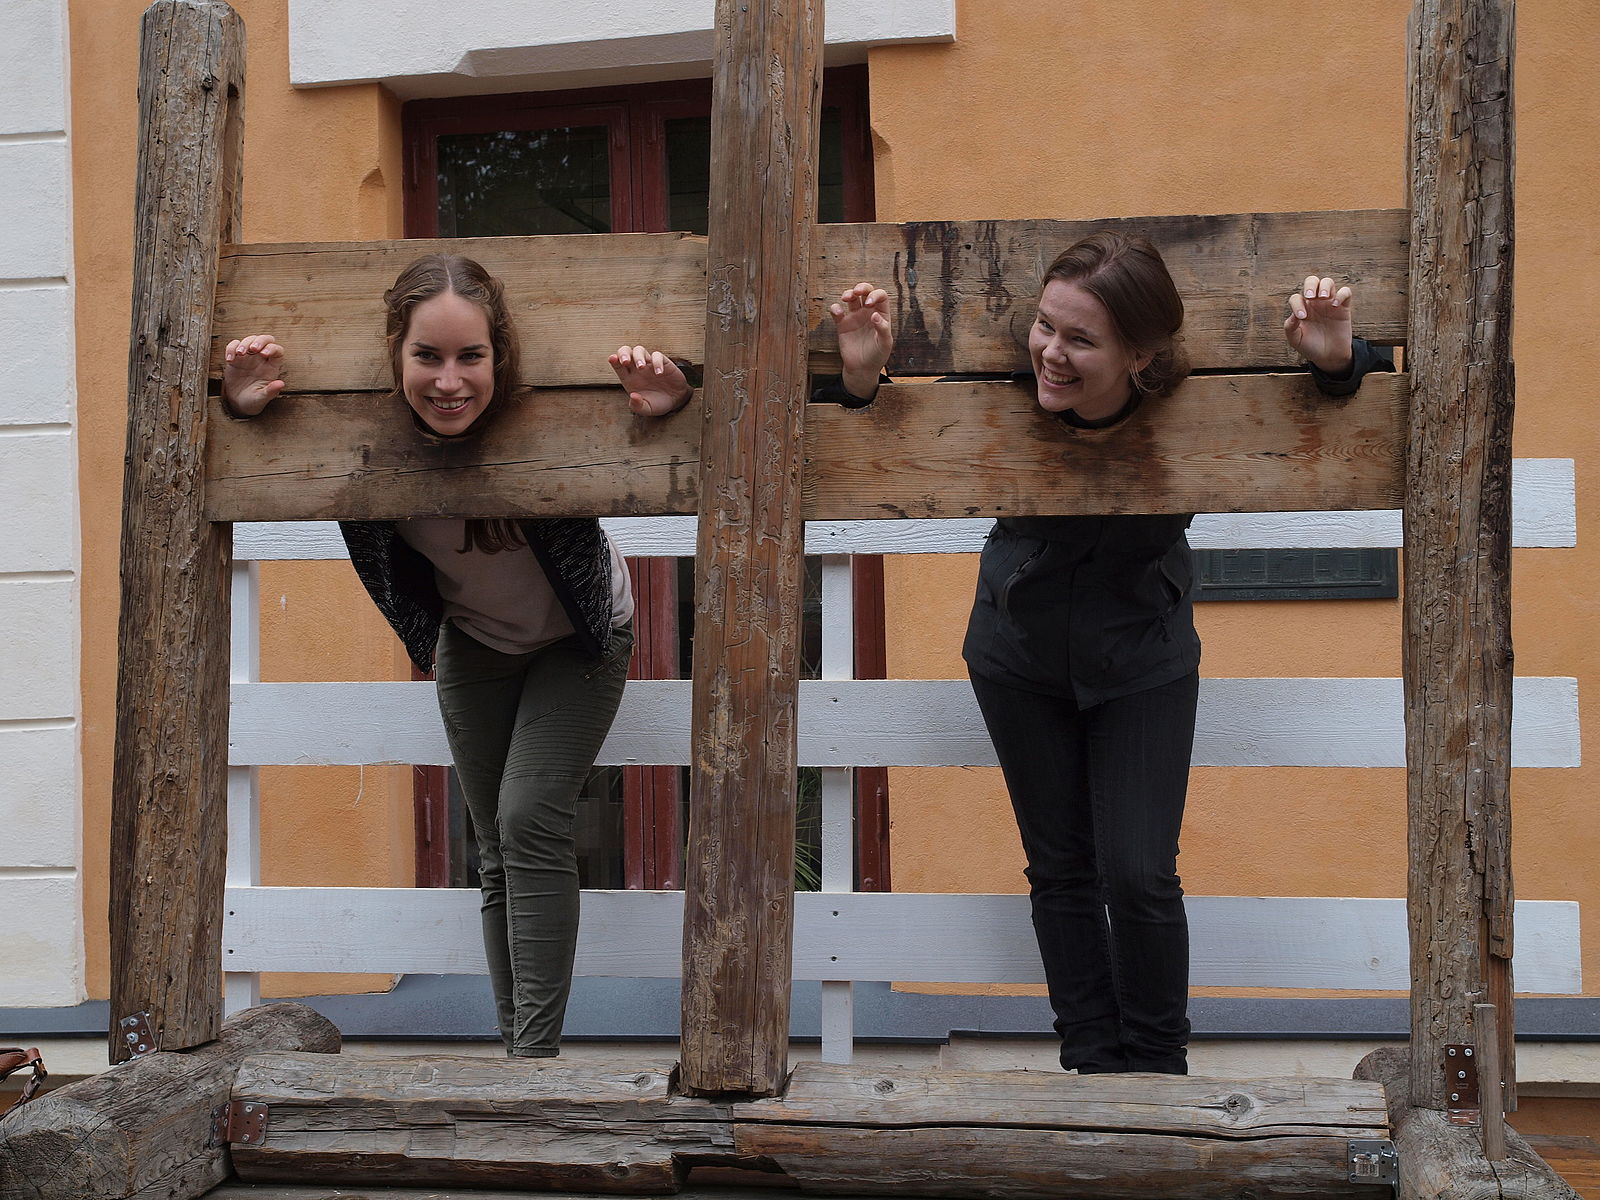 Women in pillory